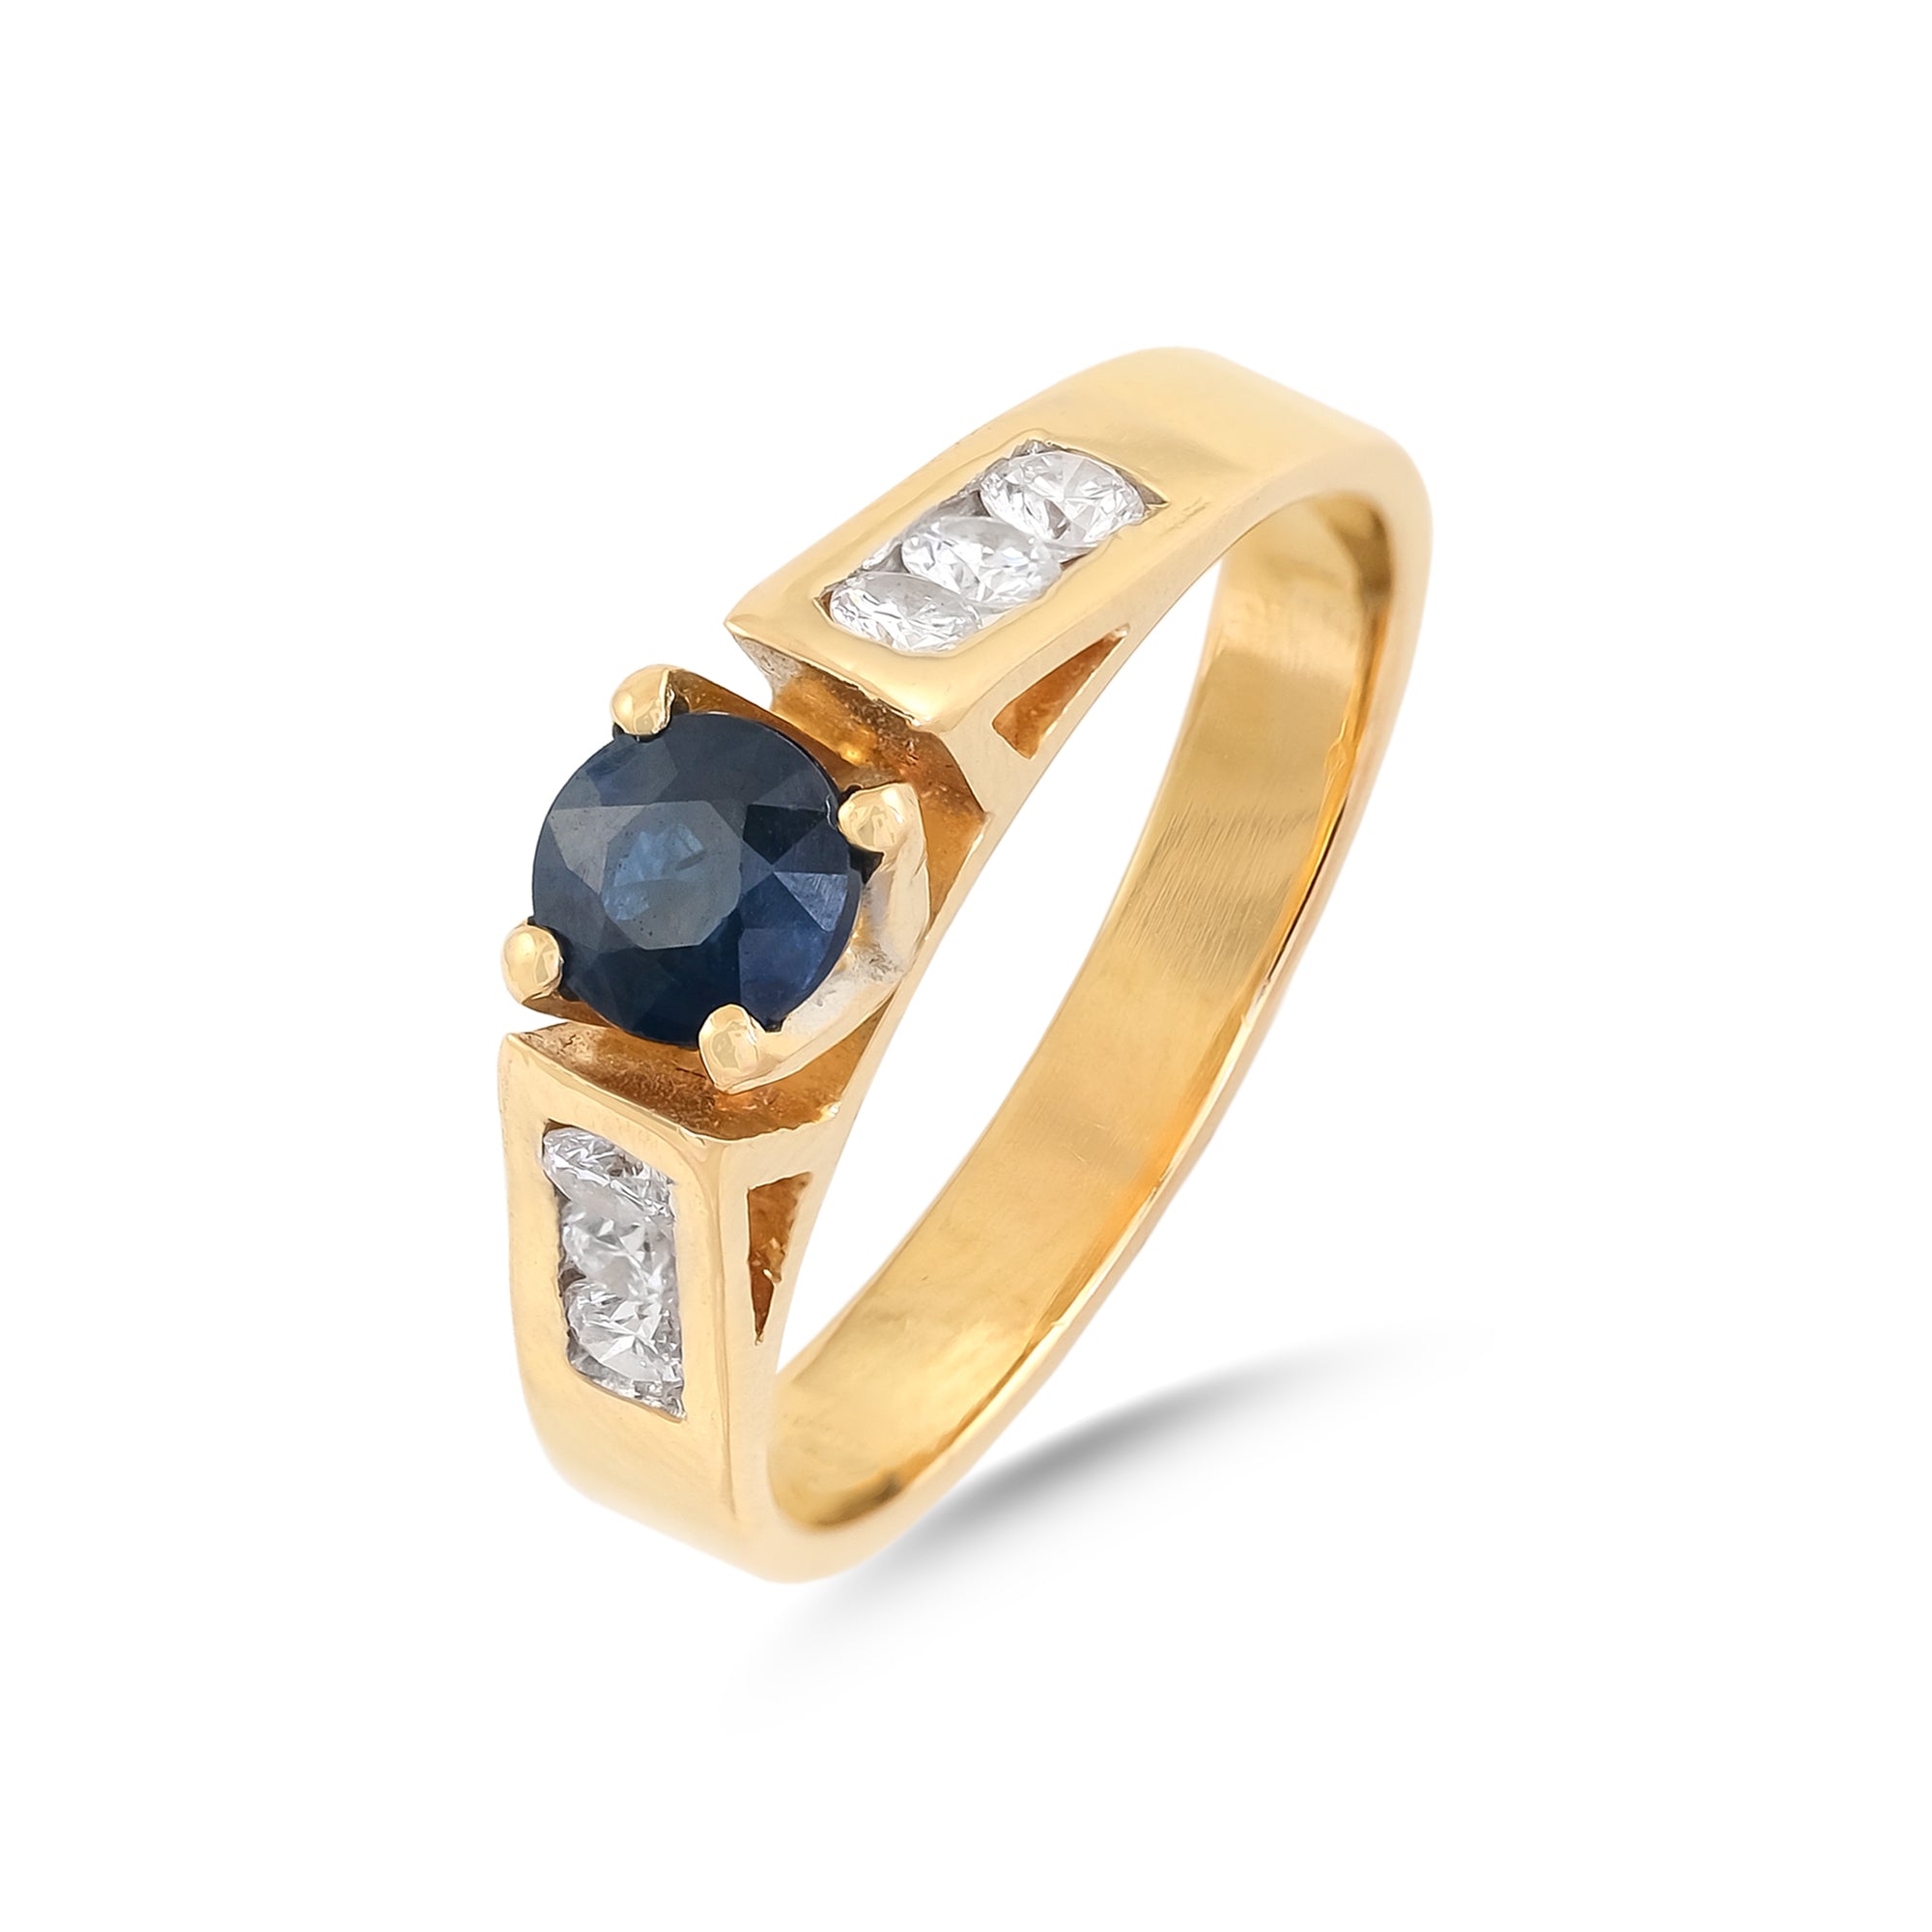 Vintage 18ct Yellow Gold Sapphire and Diamond Ring